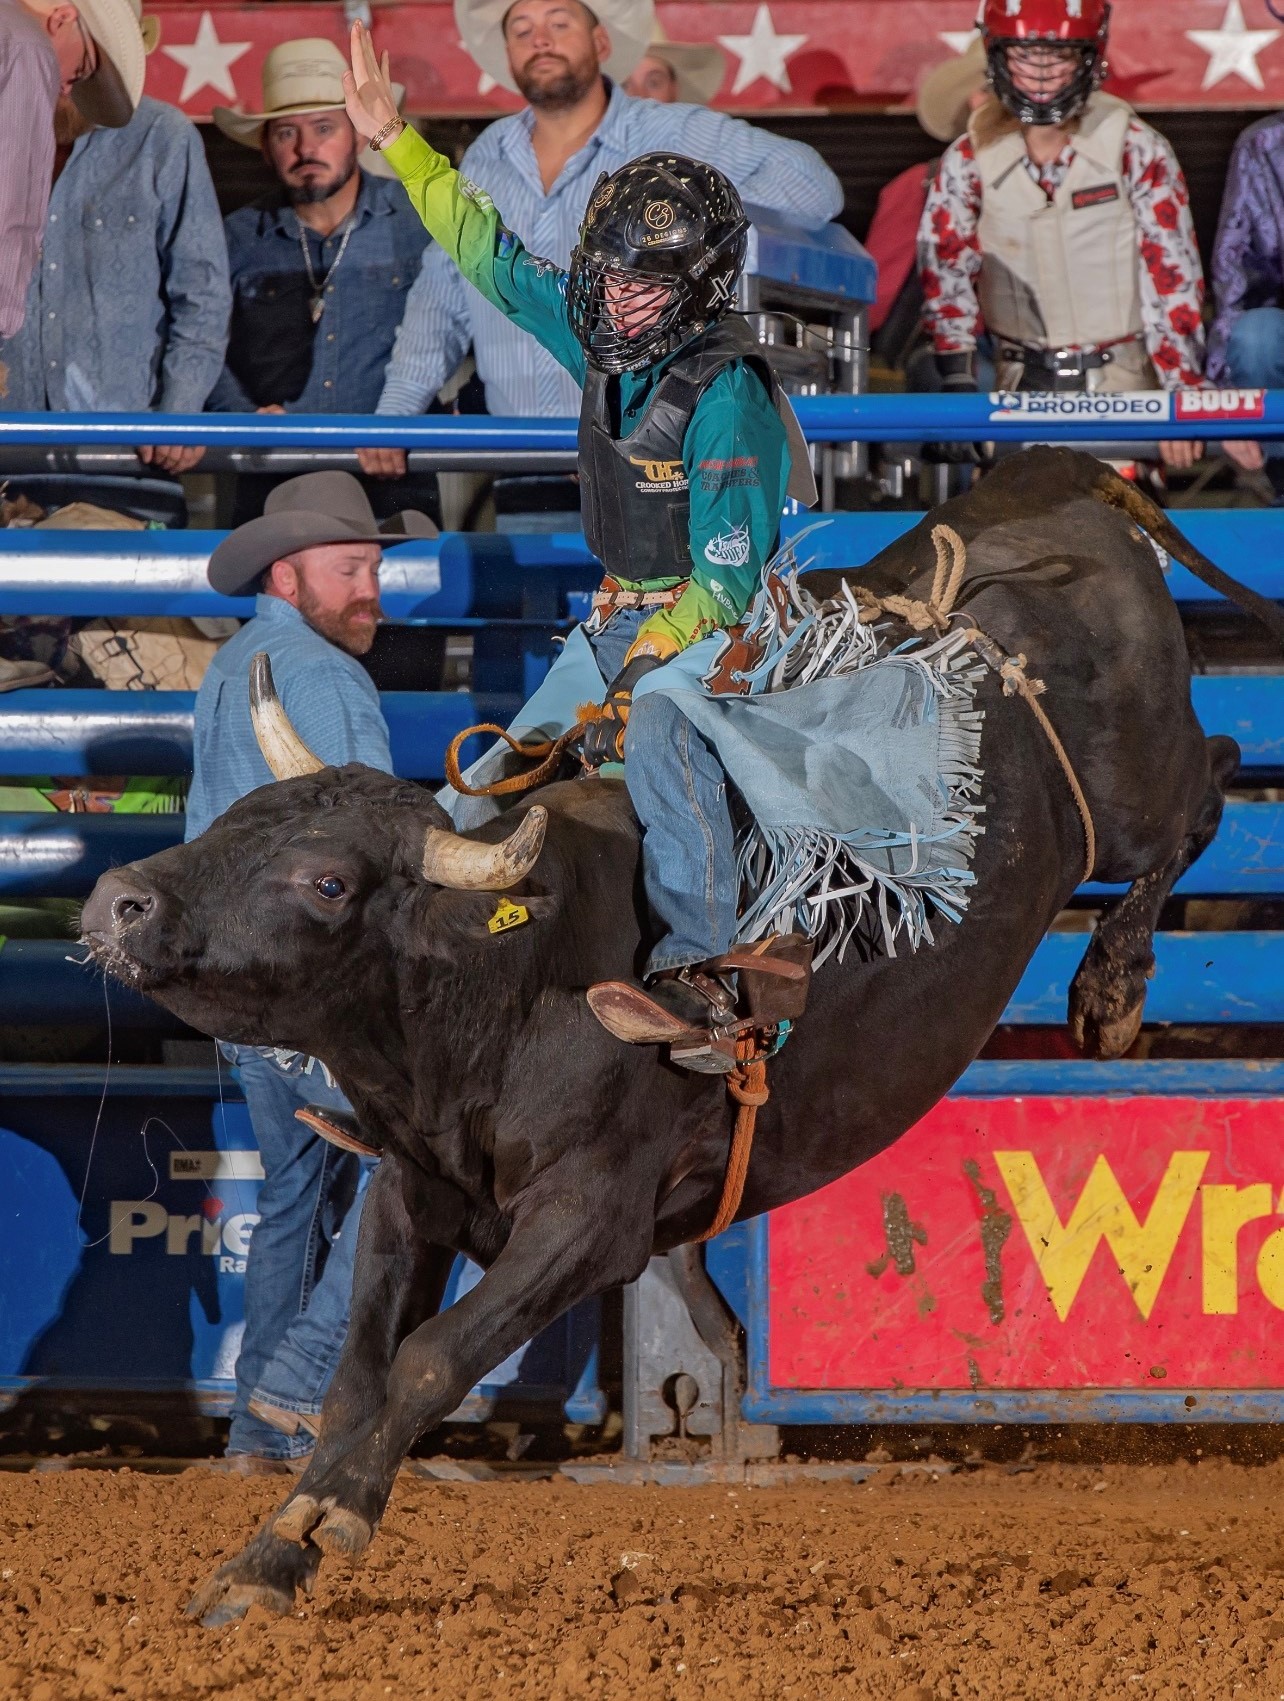 young boy riding a bucking bull wearing helmet and cowboy gear at a rodeo in Texas